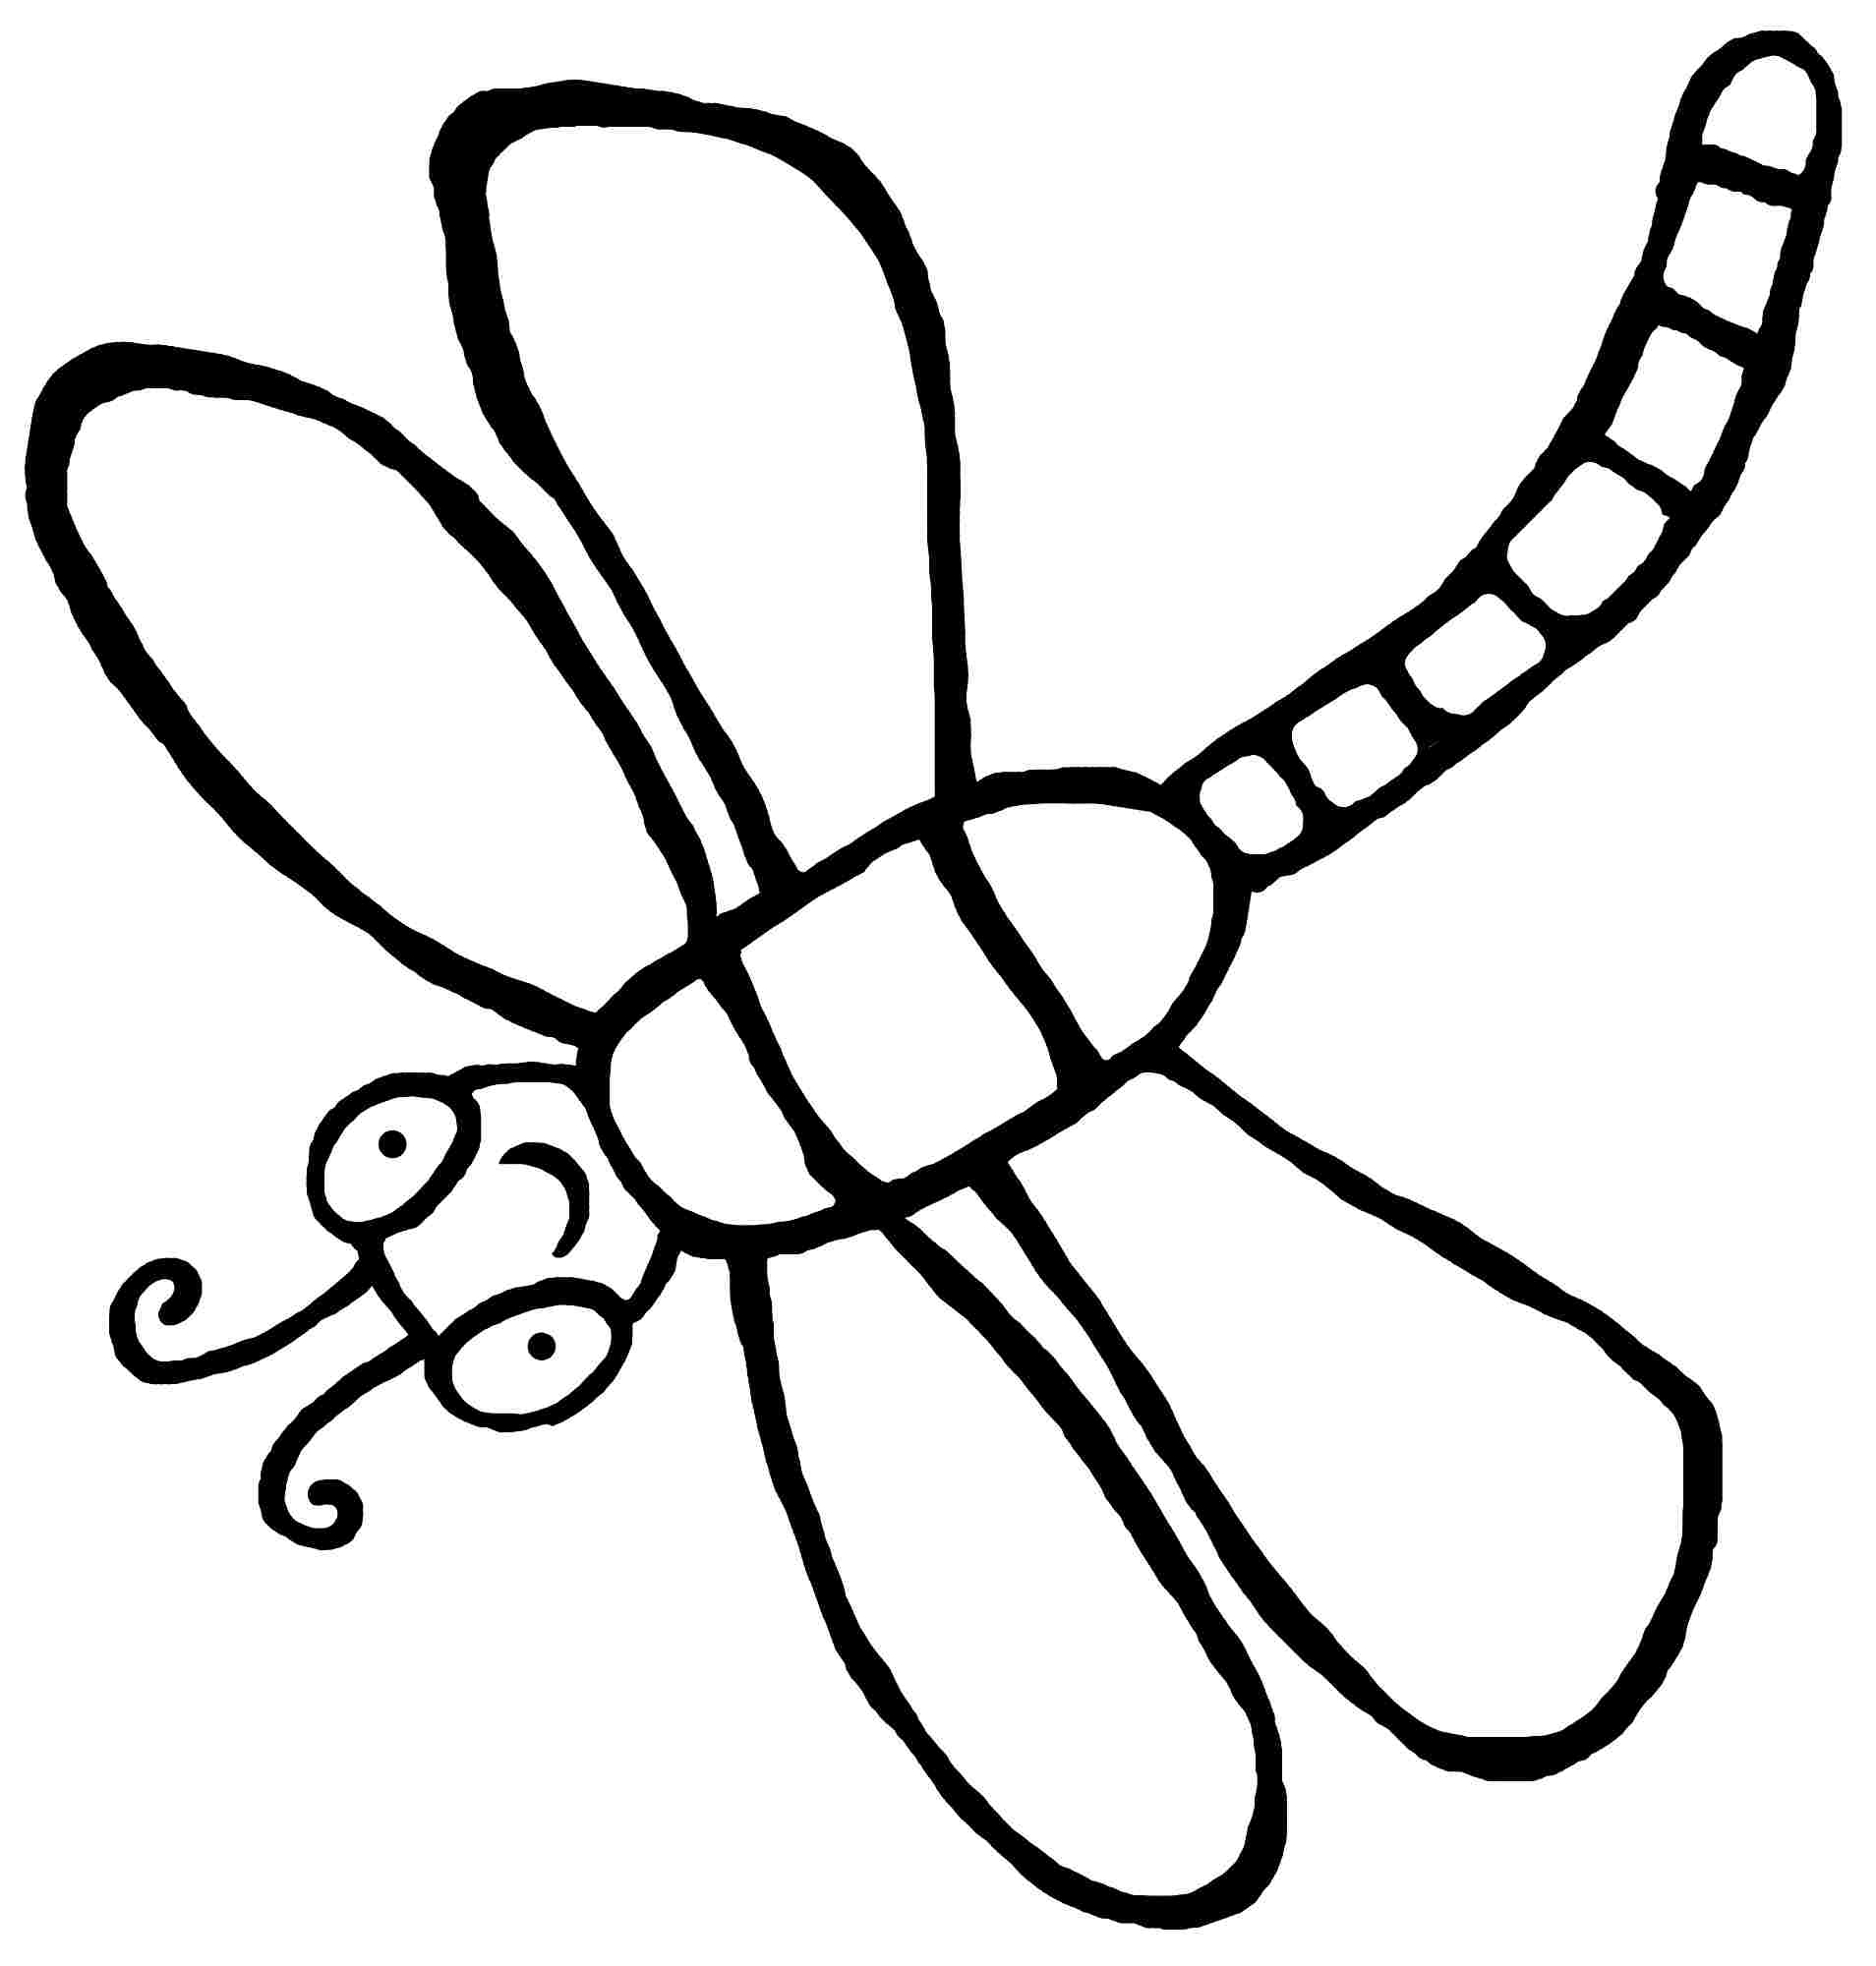 dragonfly colouring page dragonfly coloring pages getcoloringpagescom colouring dragonfly page 